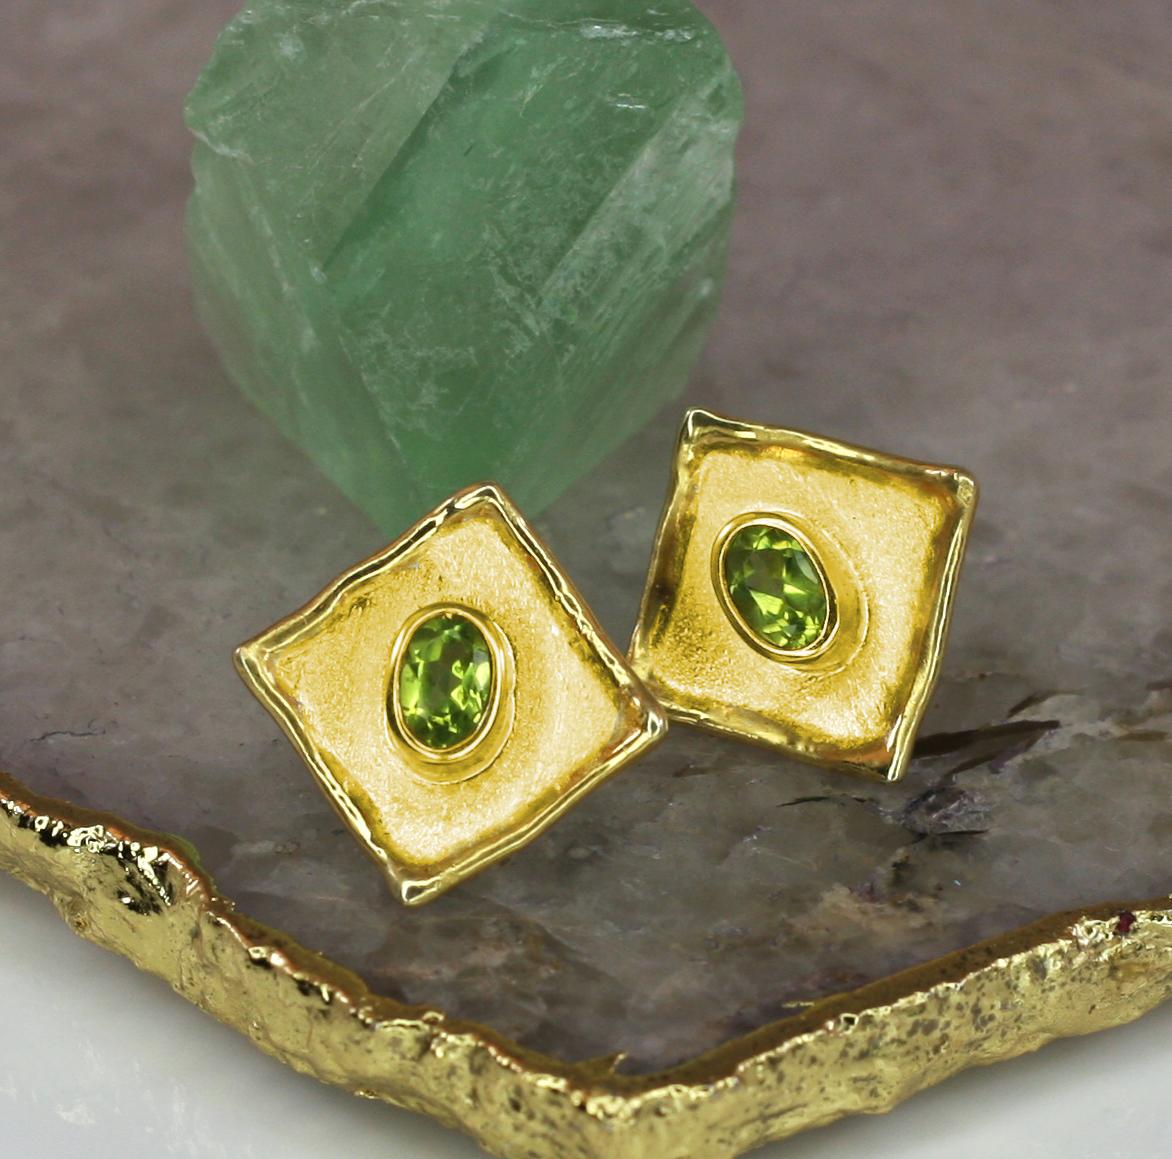 These small diamond shape Yianni Creations Earrings are 100% Handmade from 18 Karat Yellow Gold. Each earring features each 0.50 Carat Oval Cut Peridot. The unique look is created by the brushed texture and nature-inspired liquid edges. Contact us